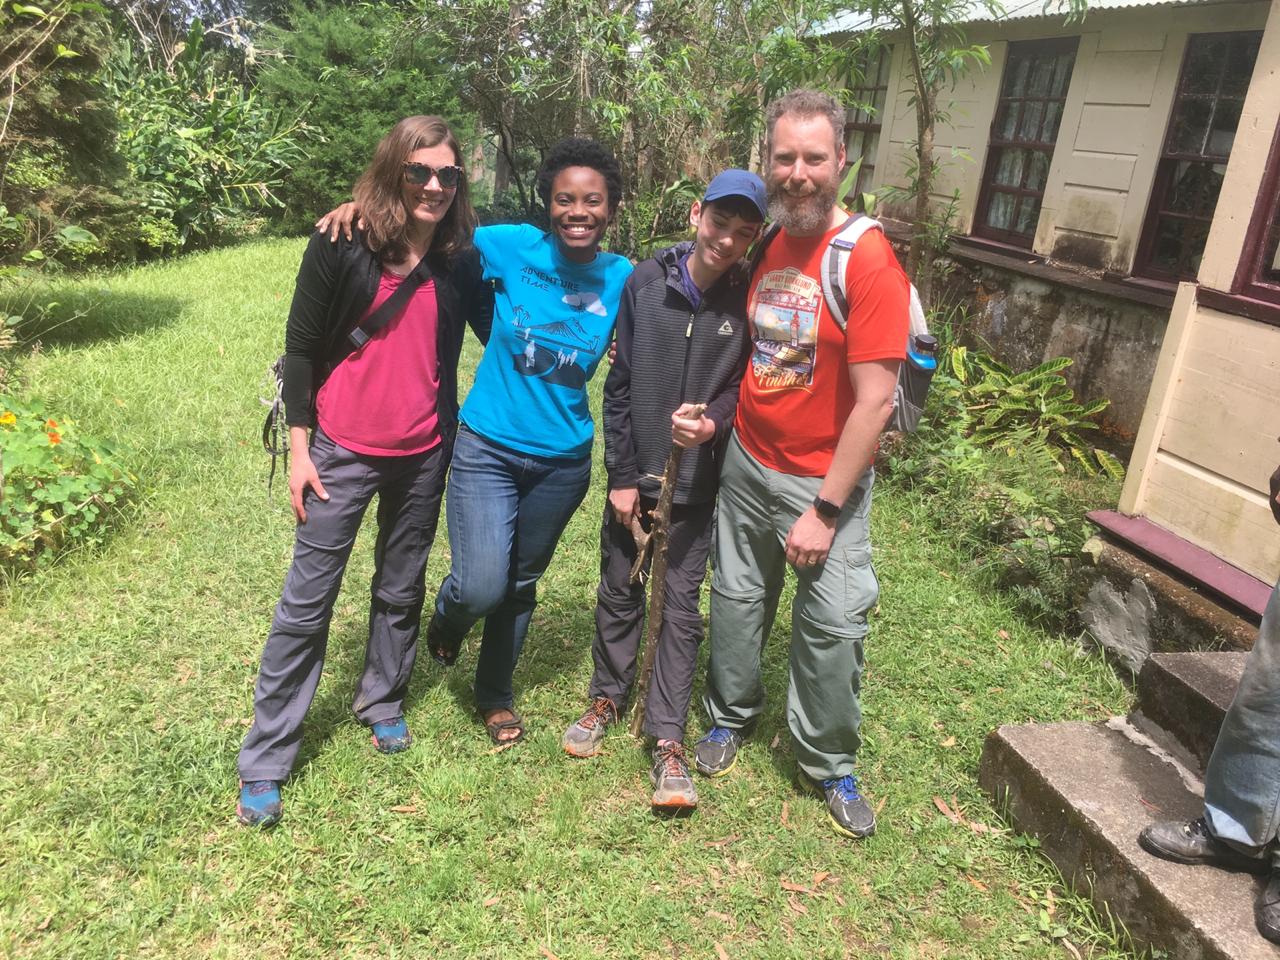 Blue Mountain Peak Cheryl Sherwood taking picture with a family traveling to Jamaica